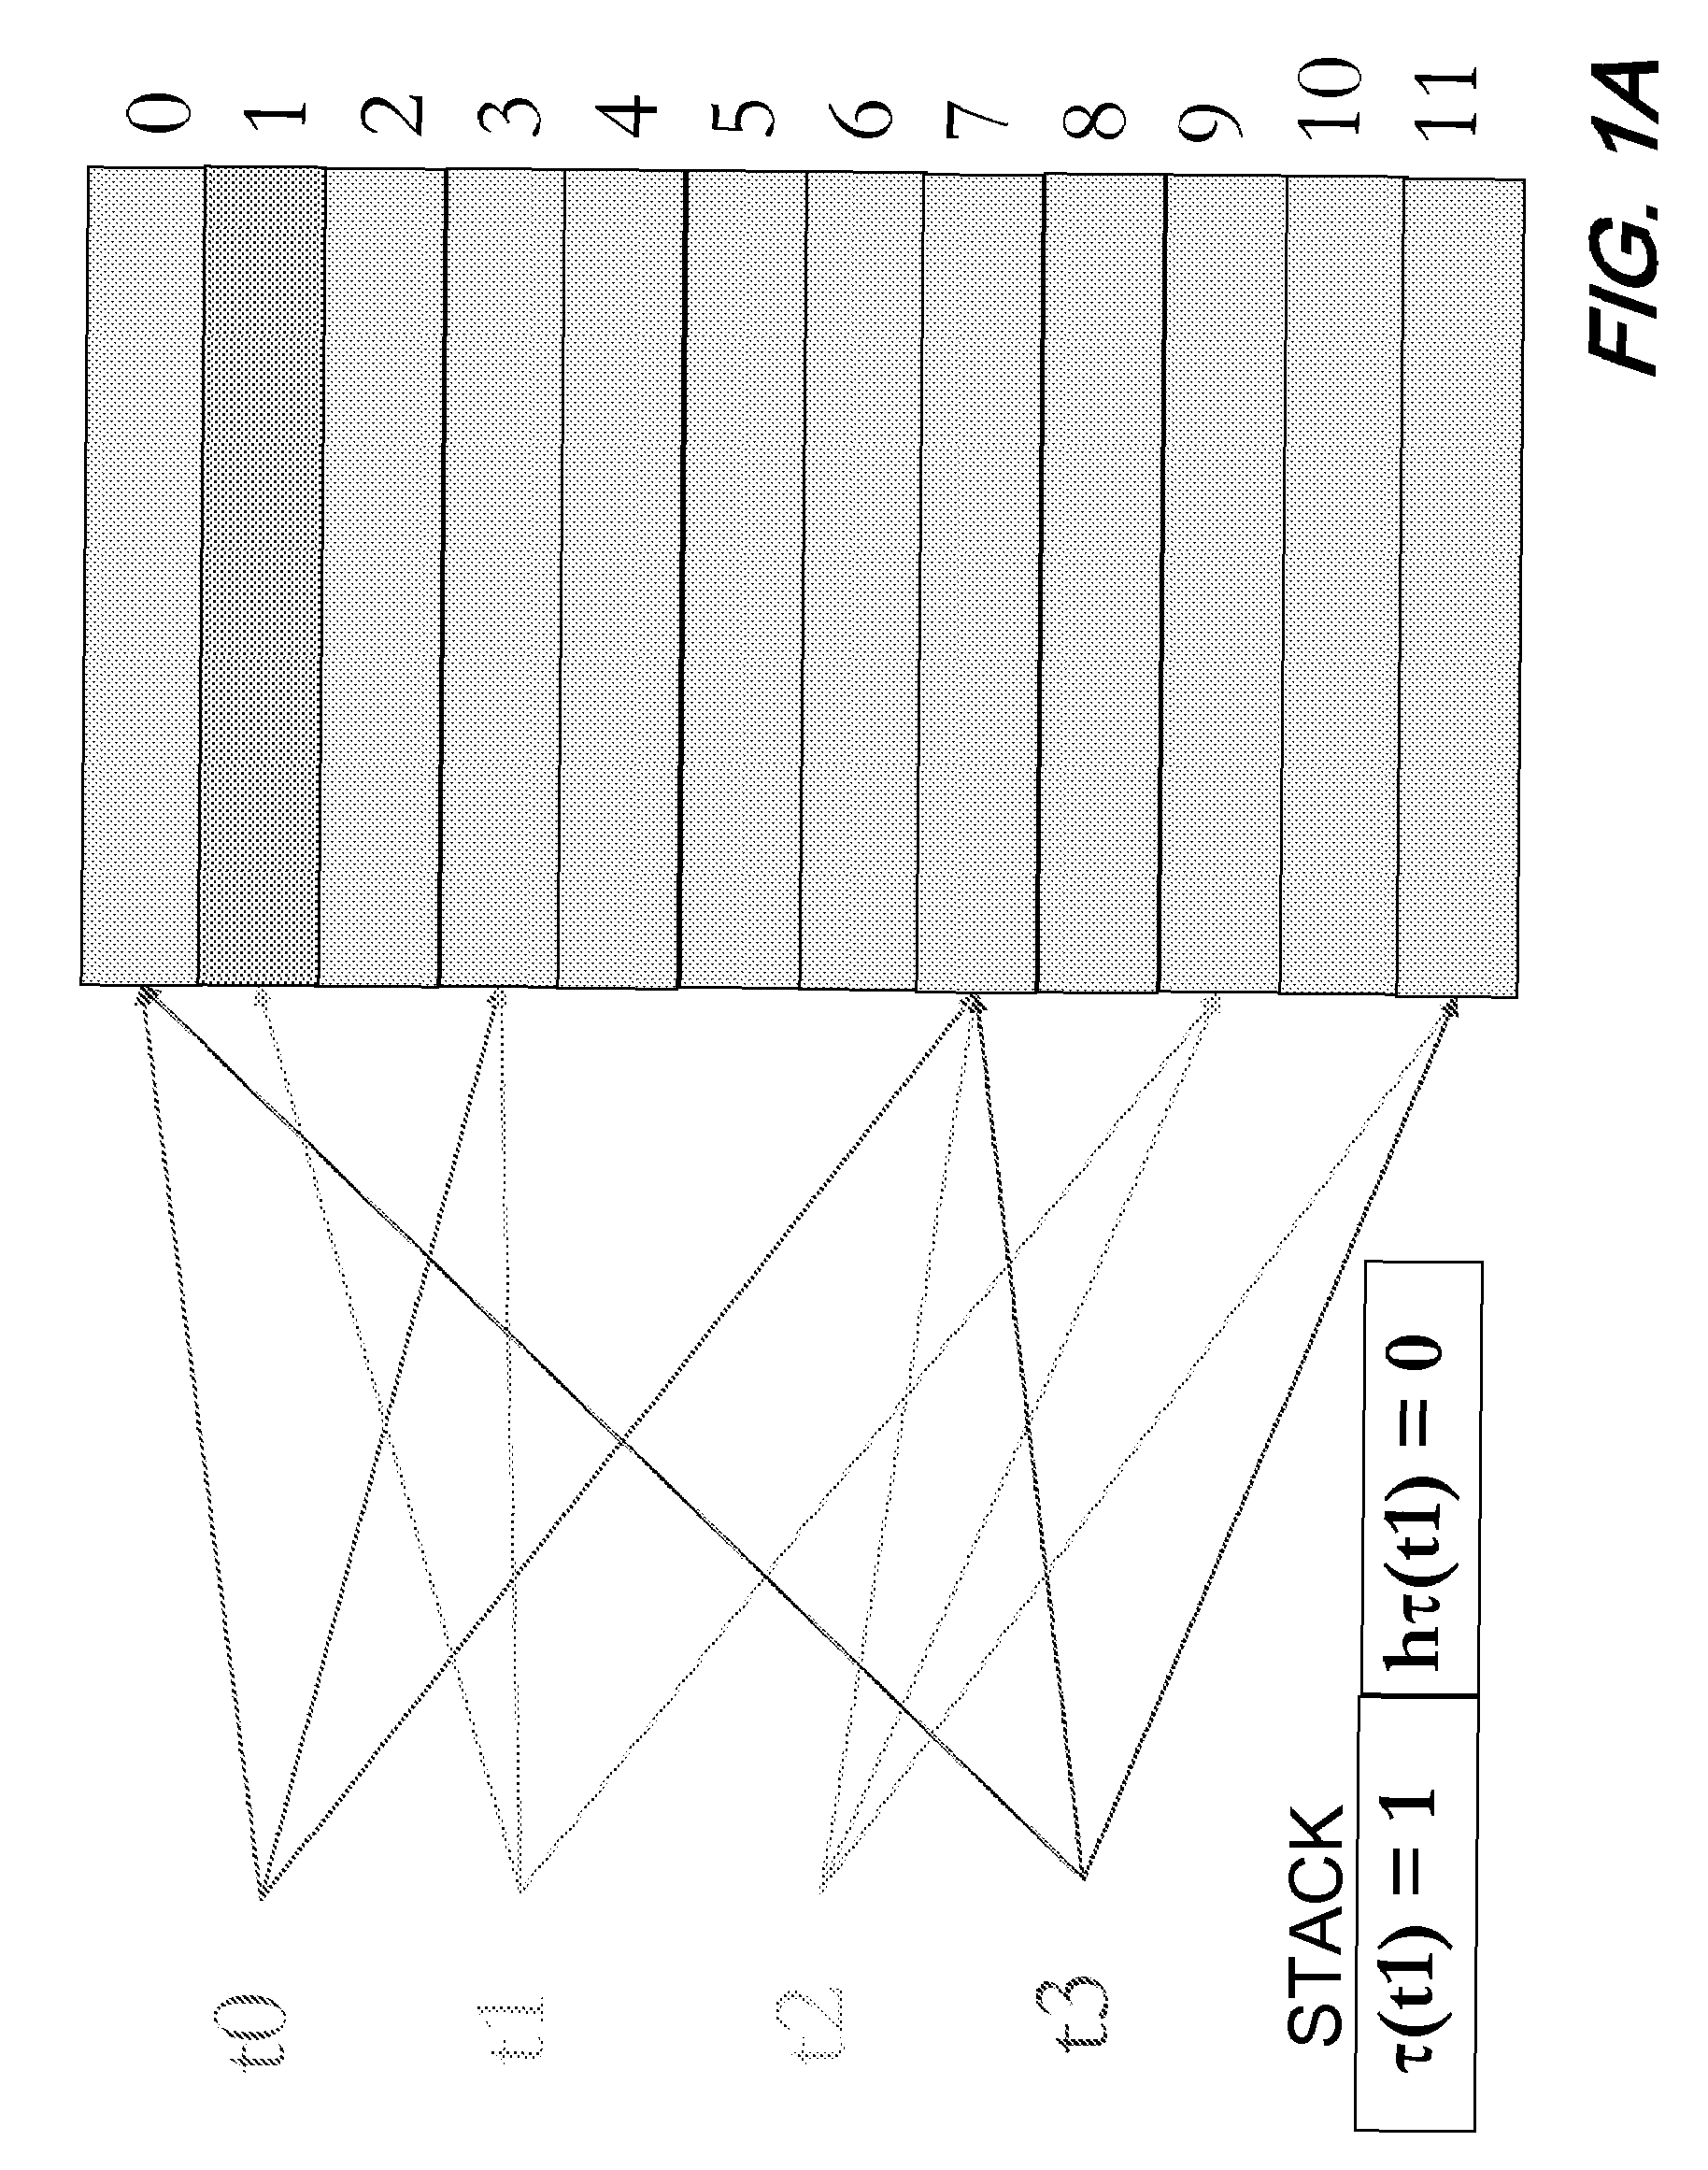 Storage-efficient and collision-free hash-based packet processing architecture and method